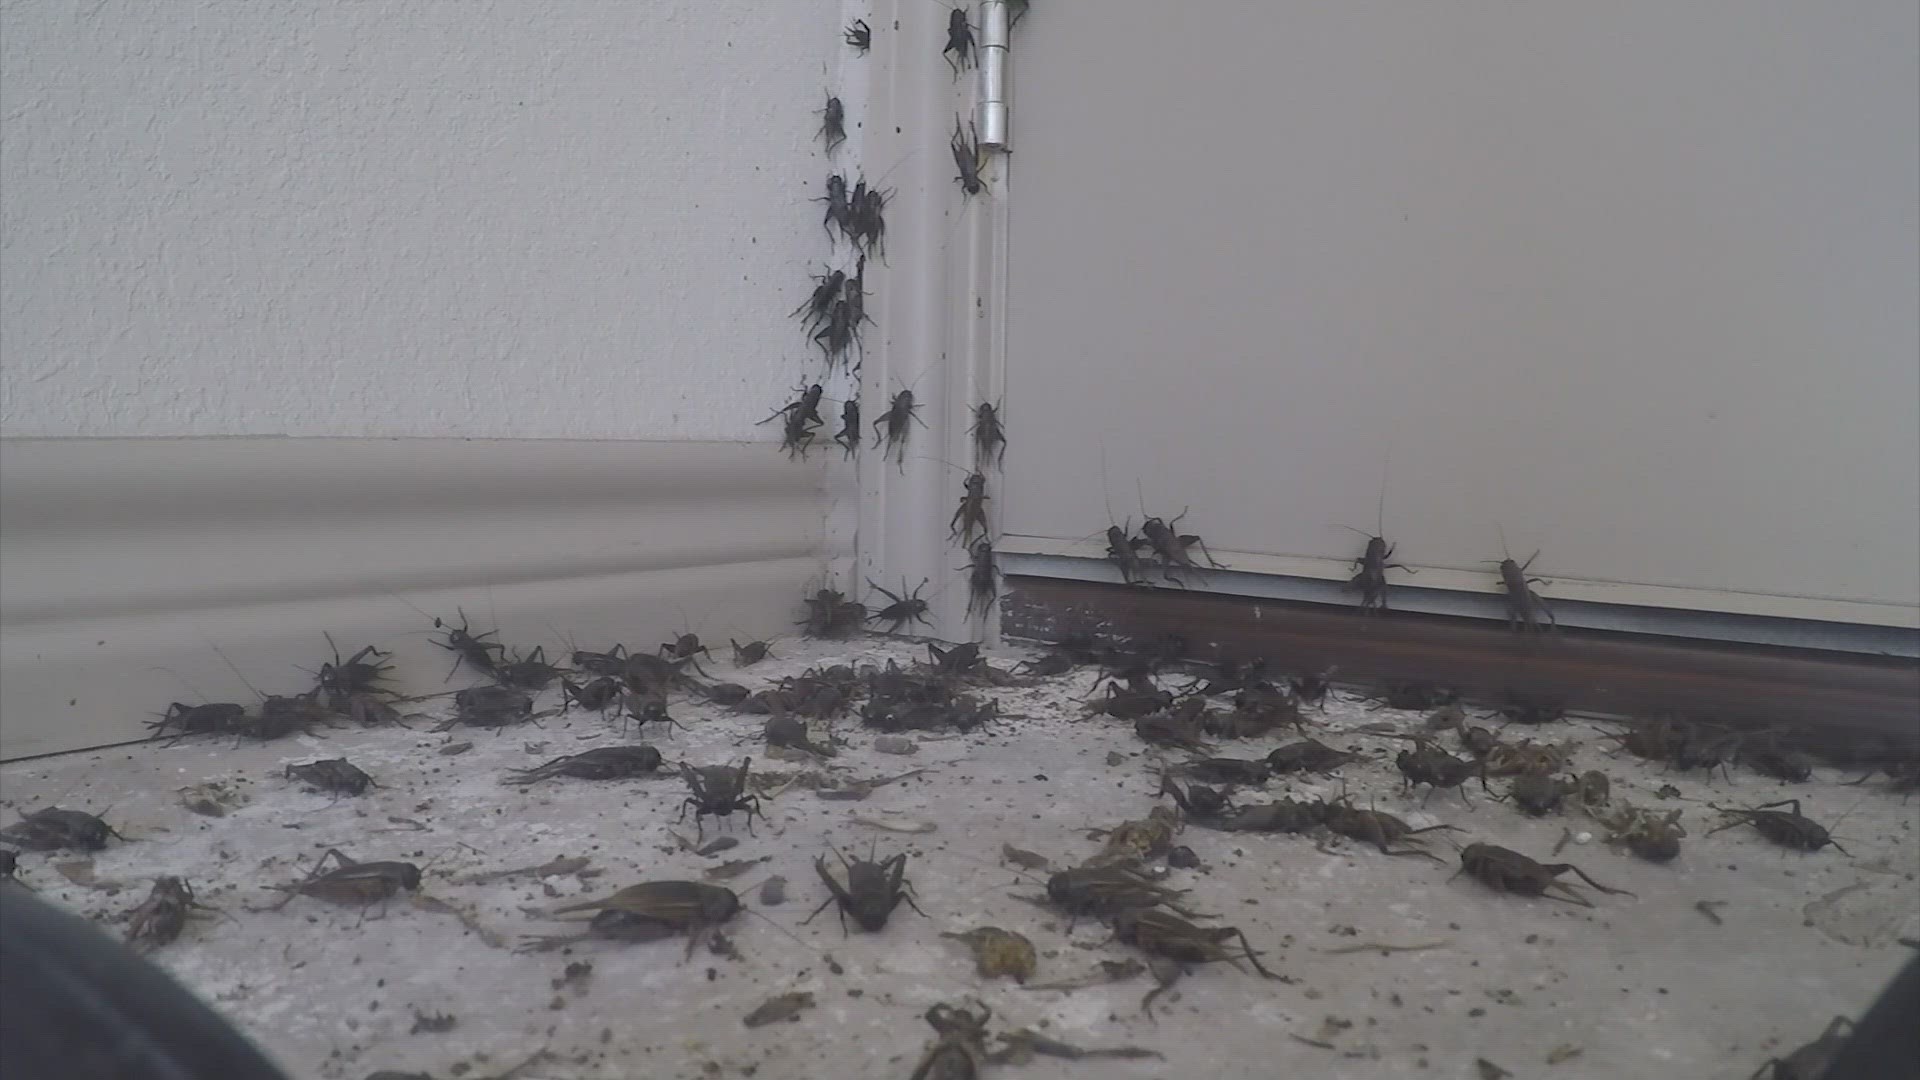 Experts said the numbers for black crickets are highest in August and September when a summer drought is broken by rainfall and cooler weather.